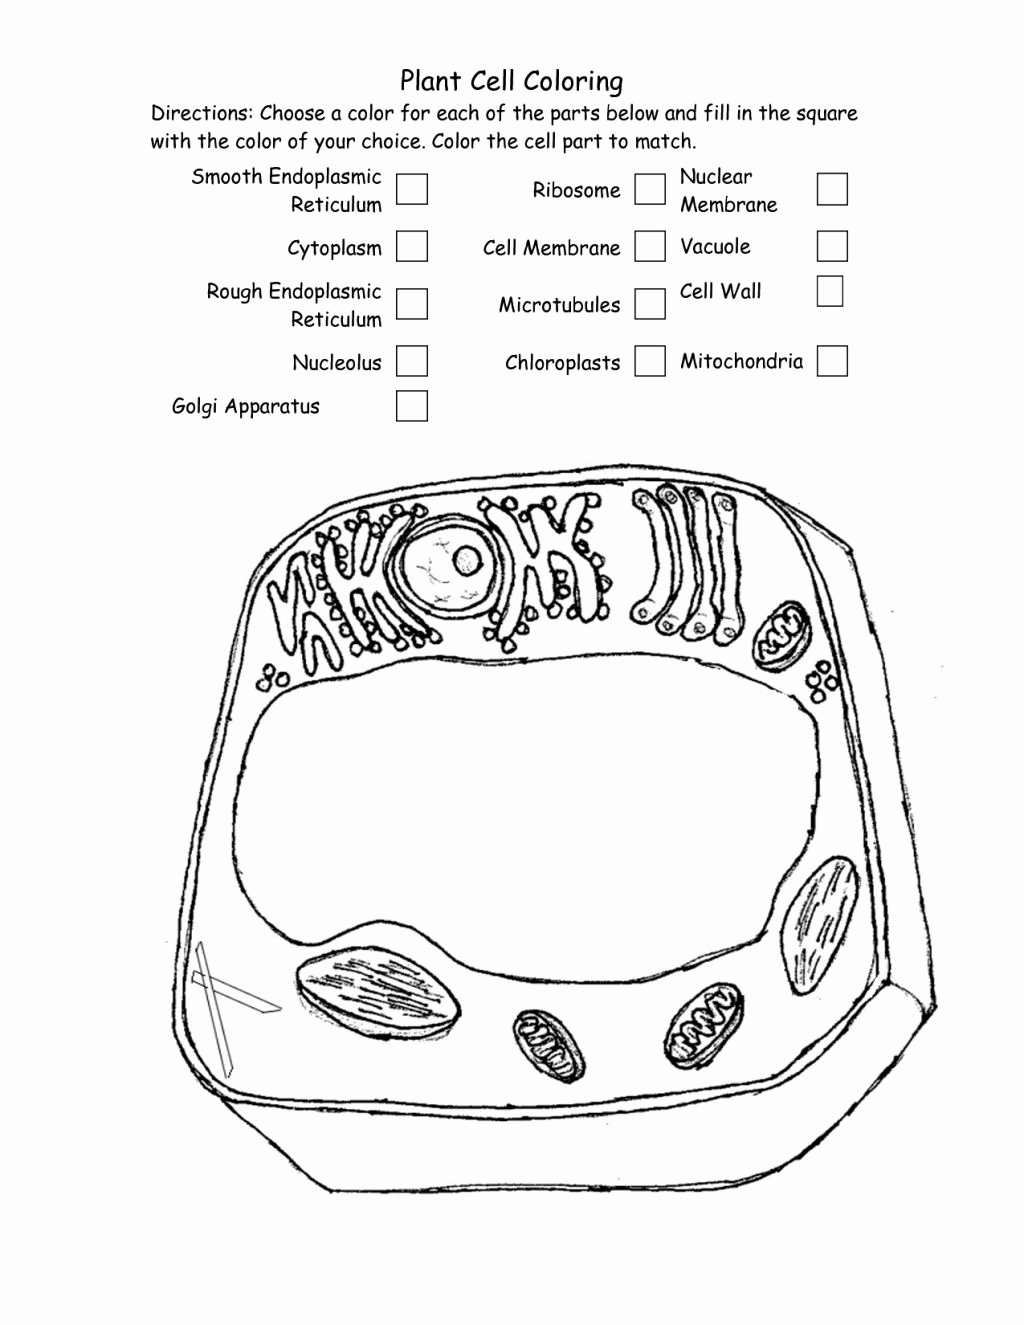 Animal Cells Coloring Worksheet Awesome Plant Cell Coloring Worksheet Answers – Coloring Pages